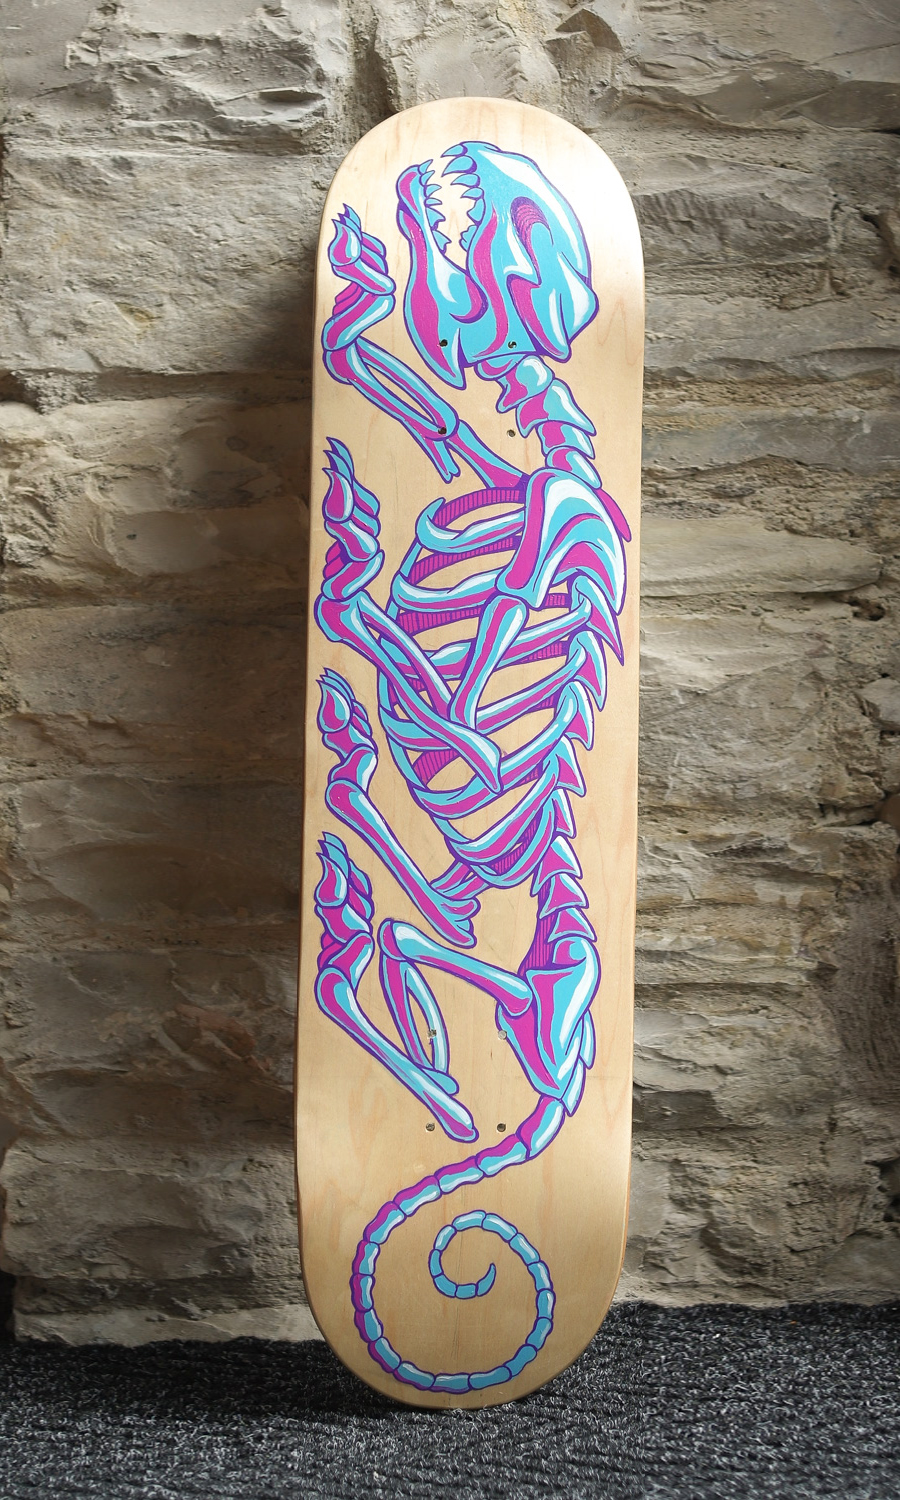 Dog Skull skateboard deck by Chad Woodward from Red Central